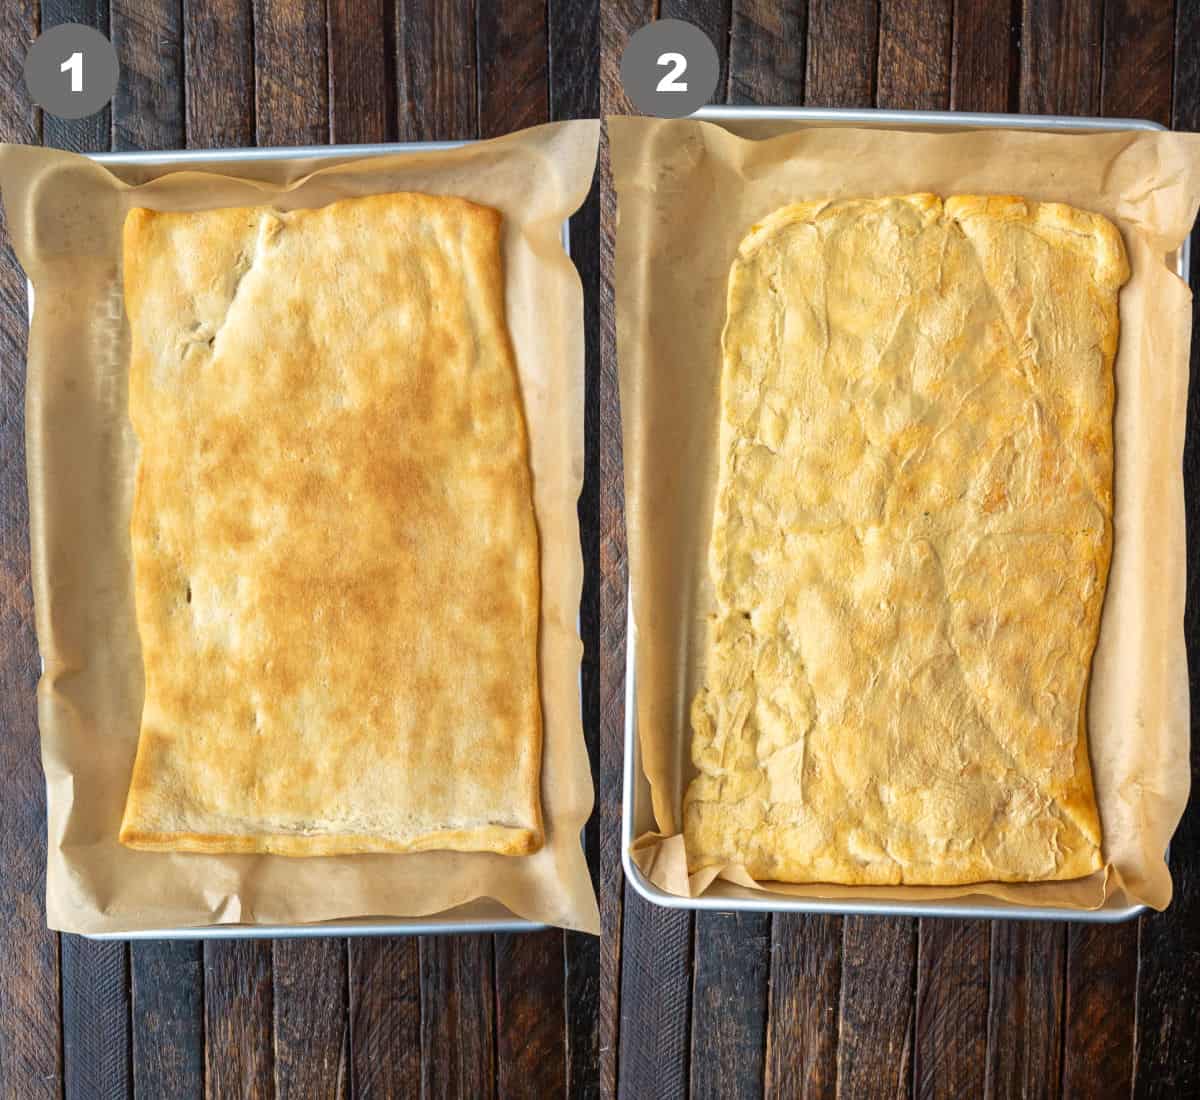 crescent roll dough baked on a baking sheet then mustard spread over the top.